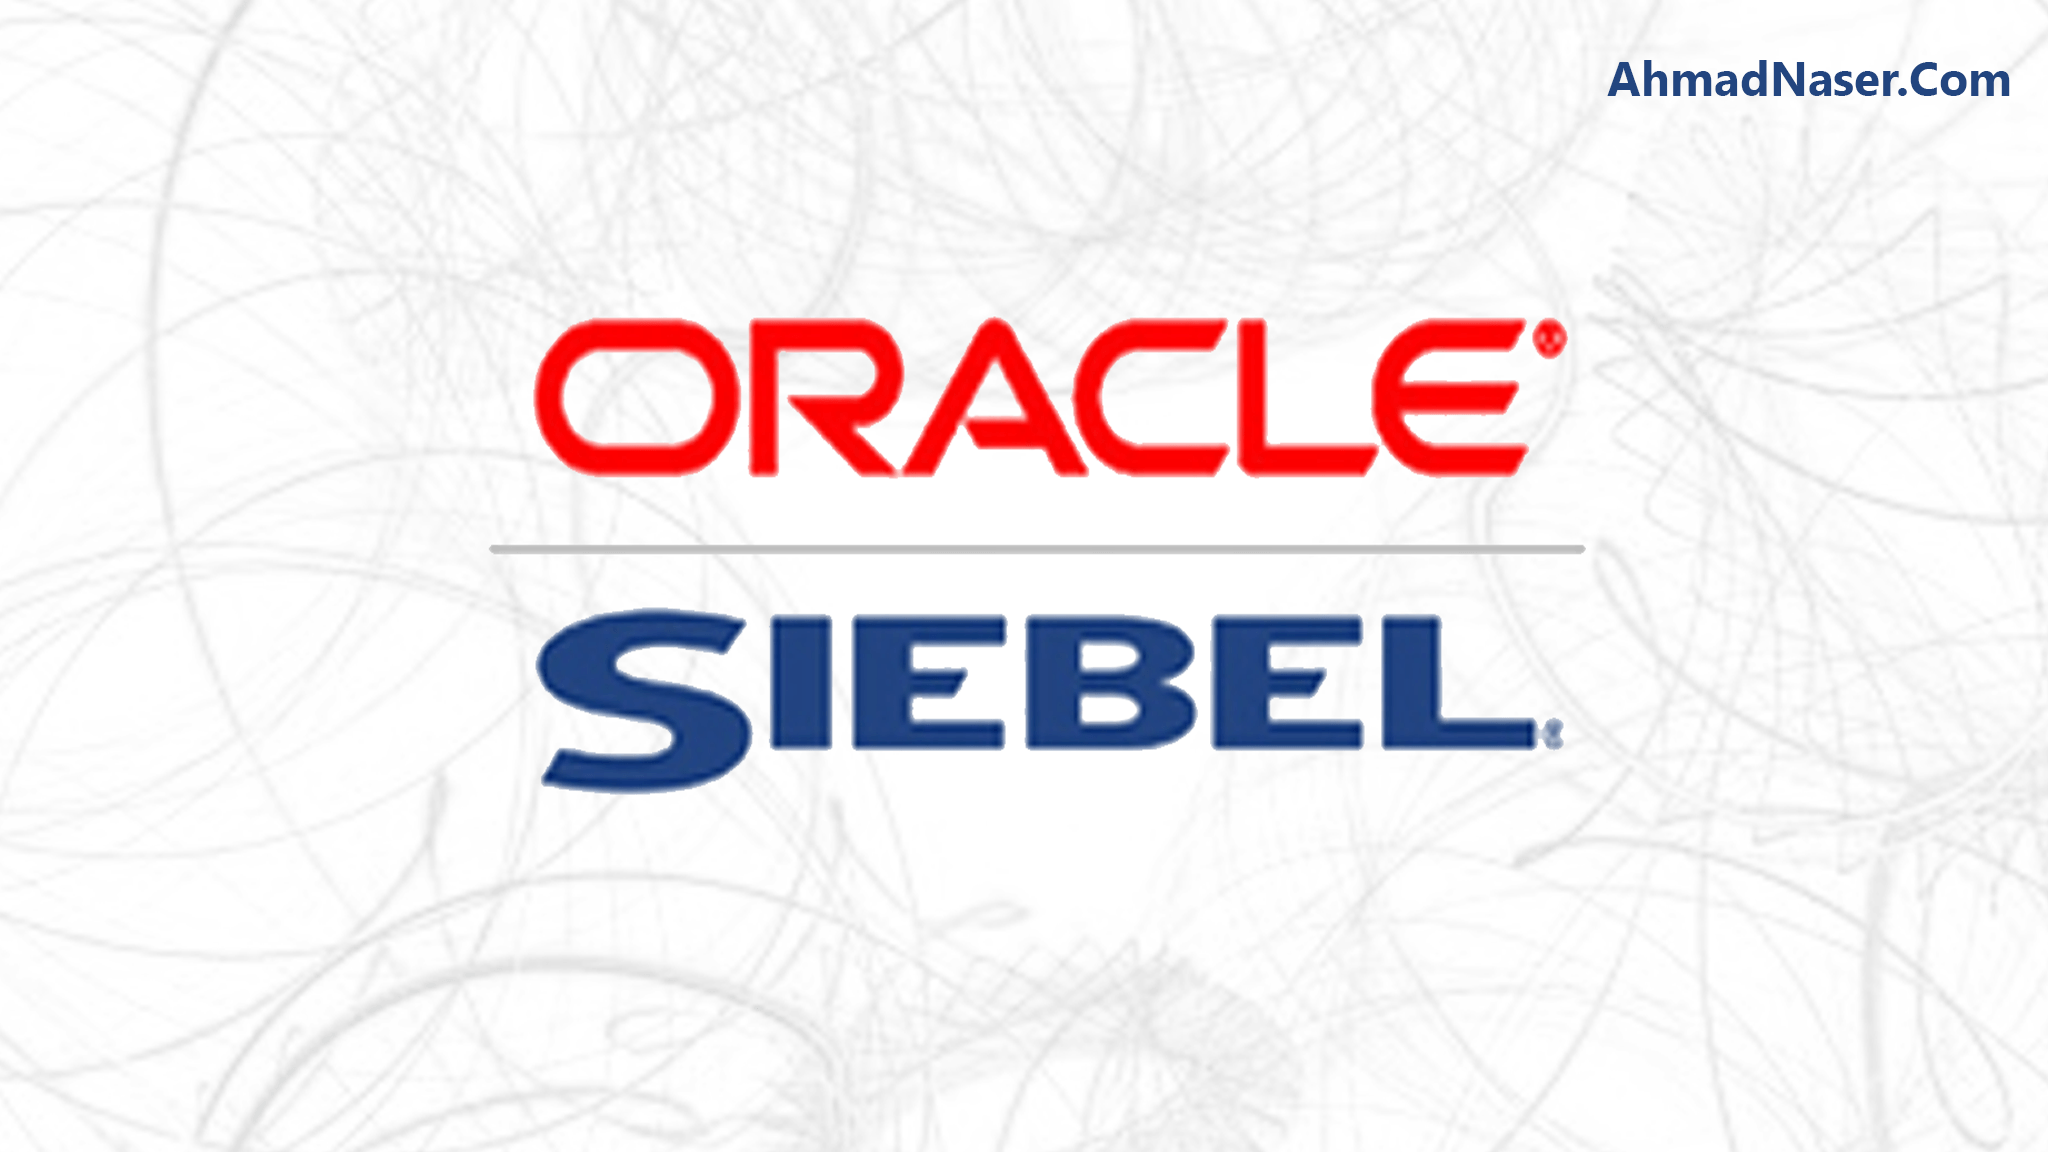 Siebel Logo - Oracle Siebel Architecture and Installation Course – Ahmad Naser